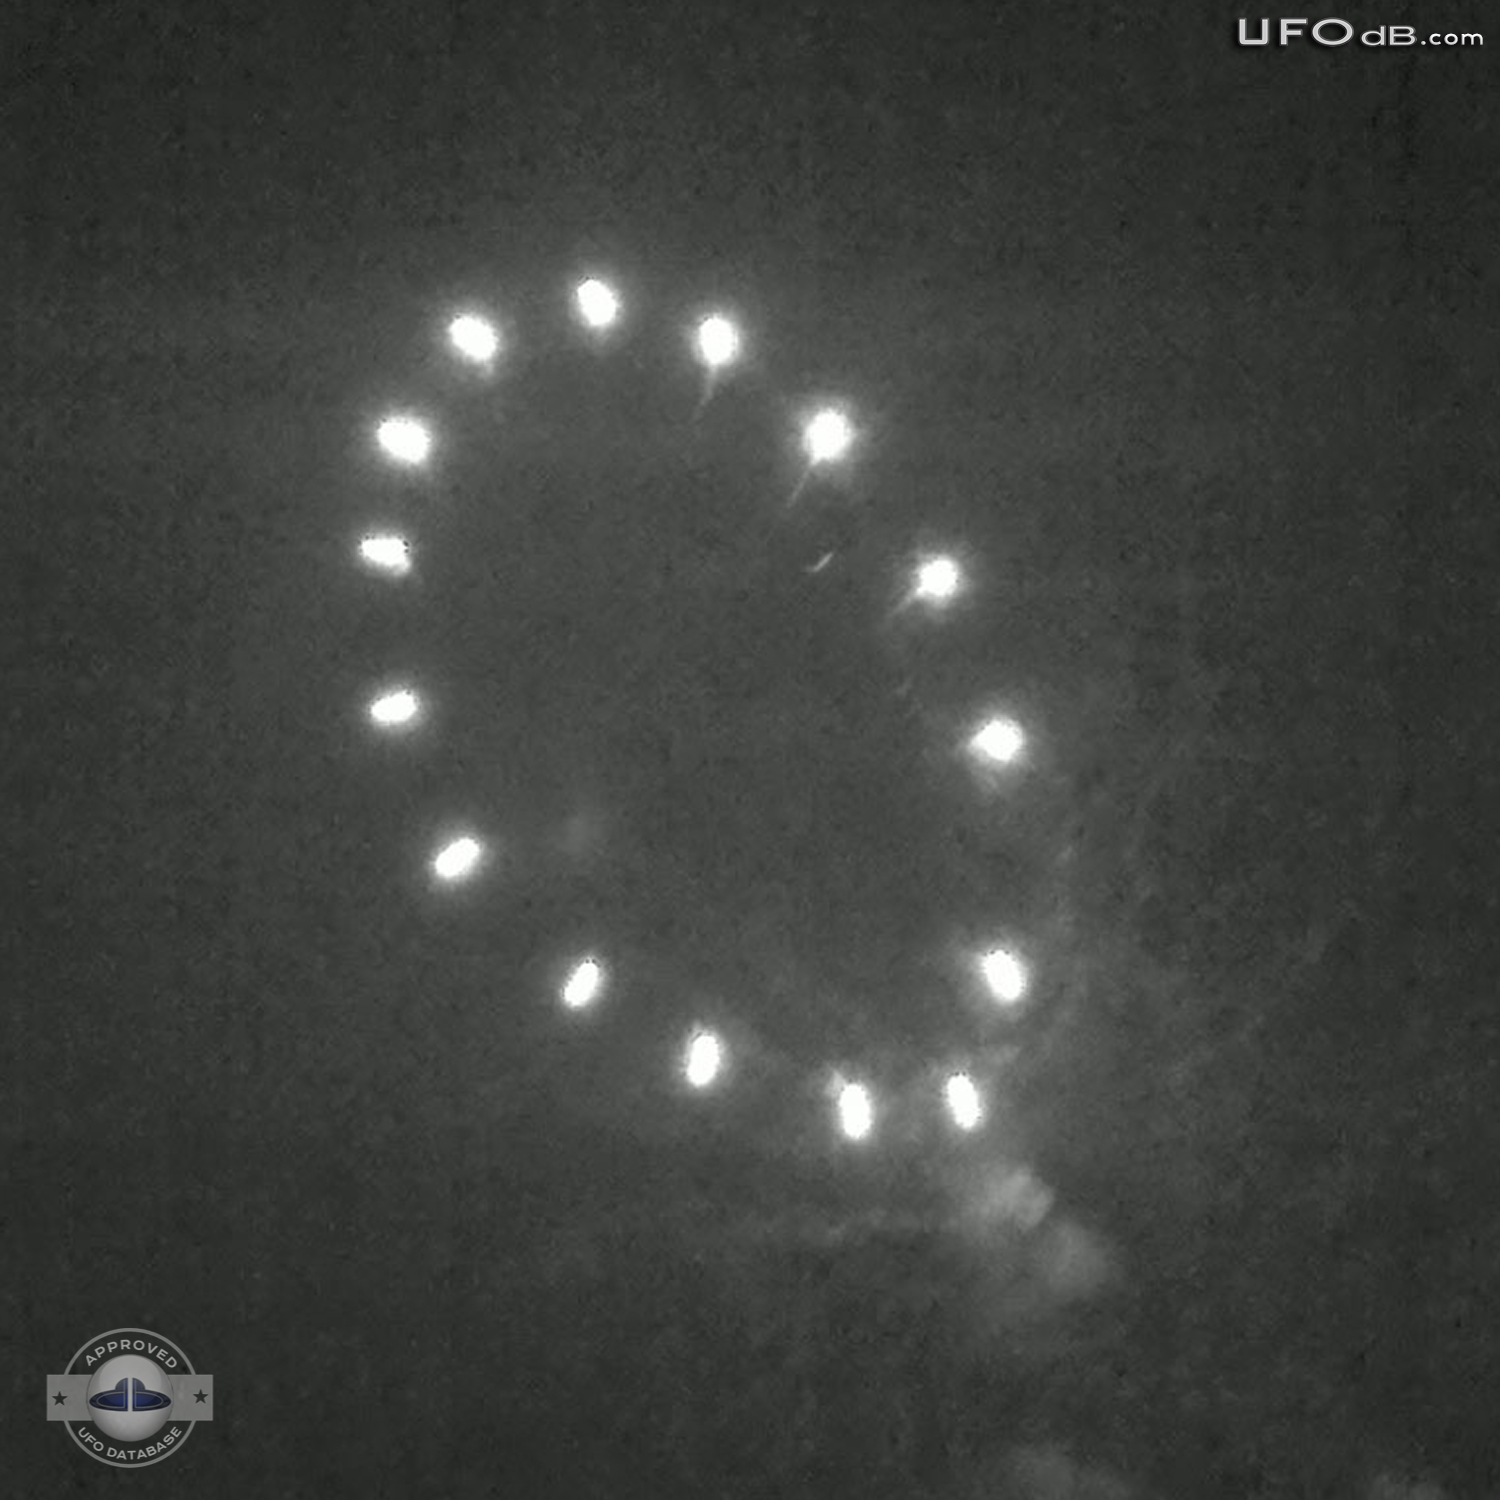 Multiple lights Saucer display a glowing ring in the night - Ranier MN UFO Picture #346-2